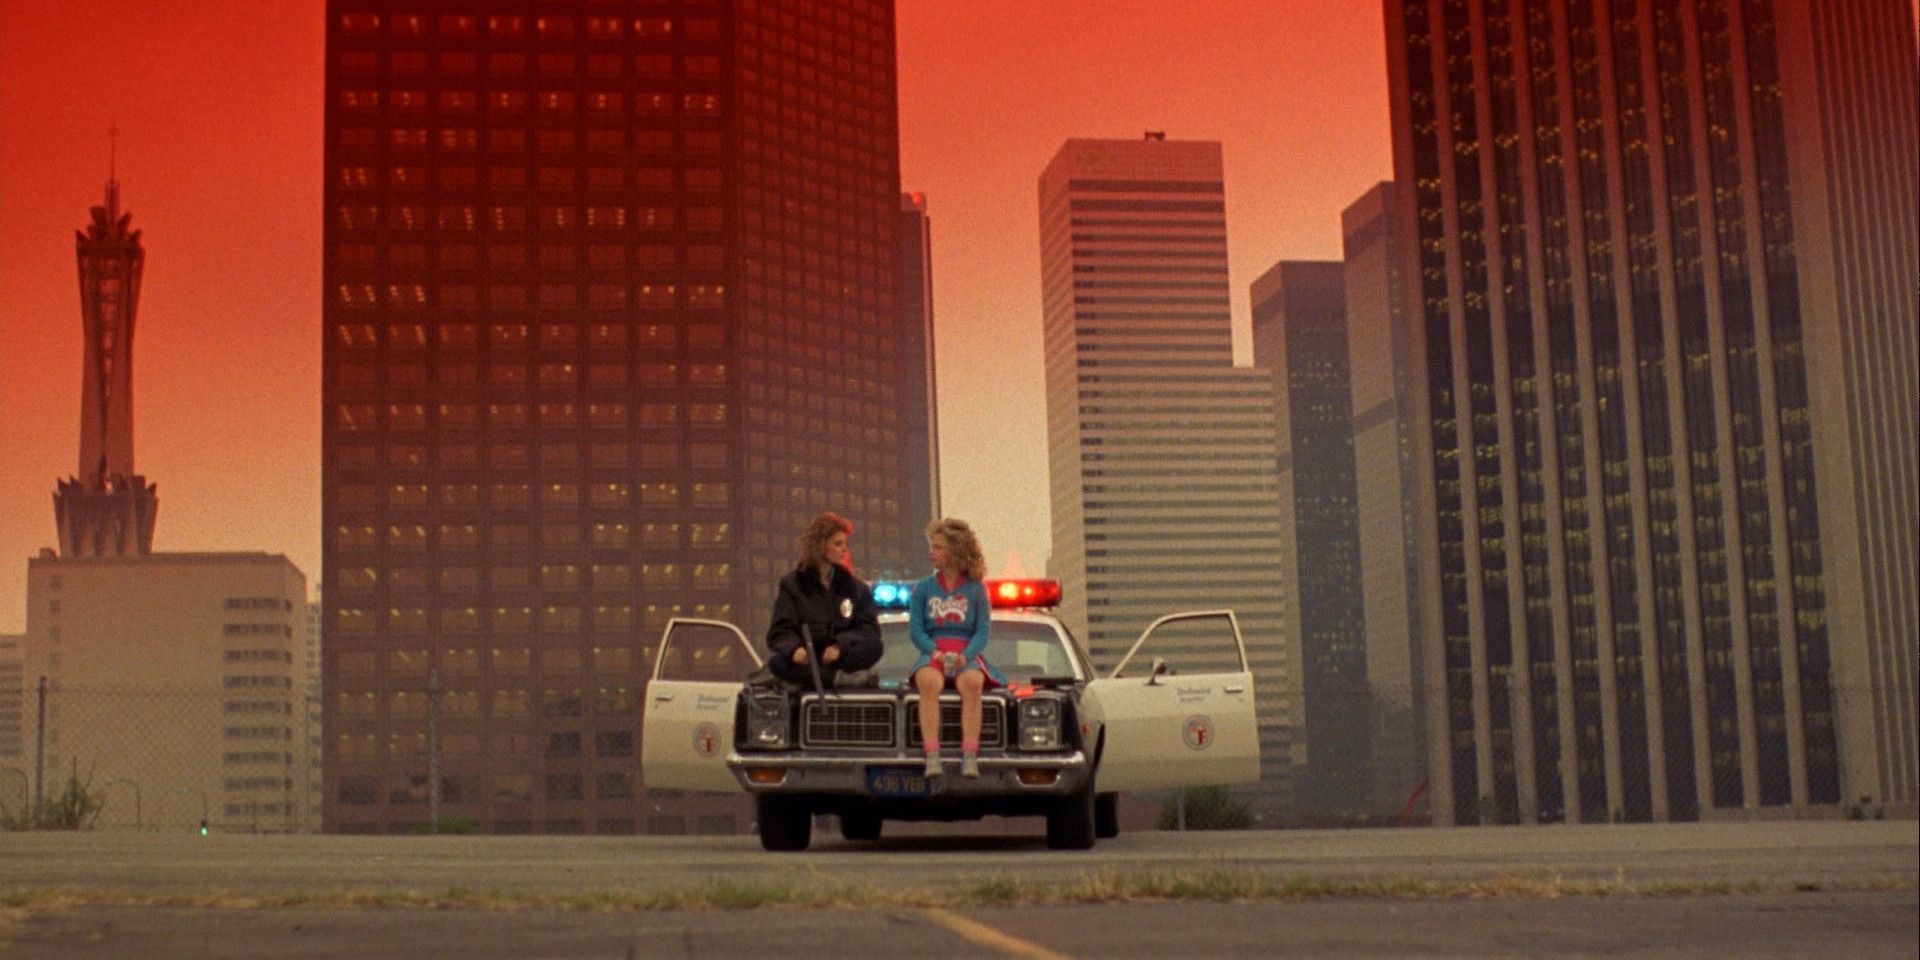 Reggie and Sam sitting on a cop car in Night of the Comet.